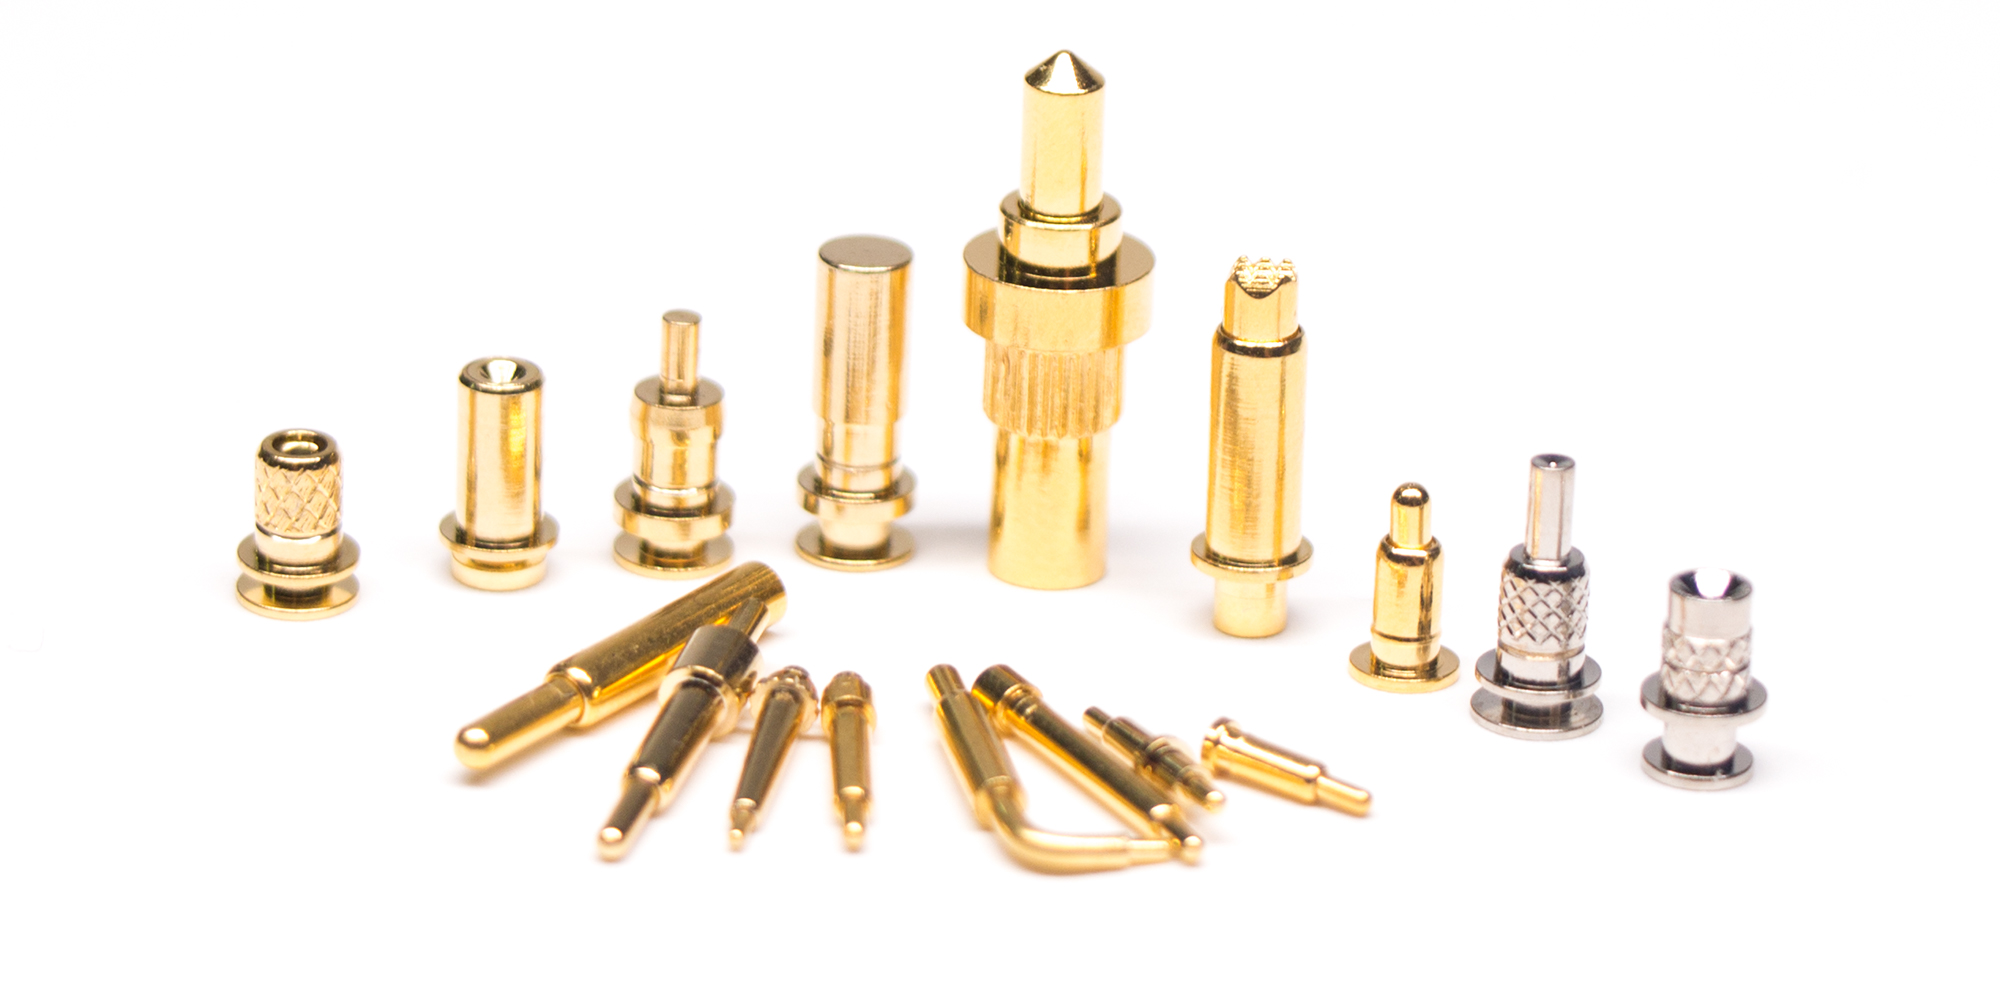 Different Types of Pogo Pin Connectors Available in the Market